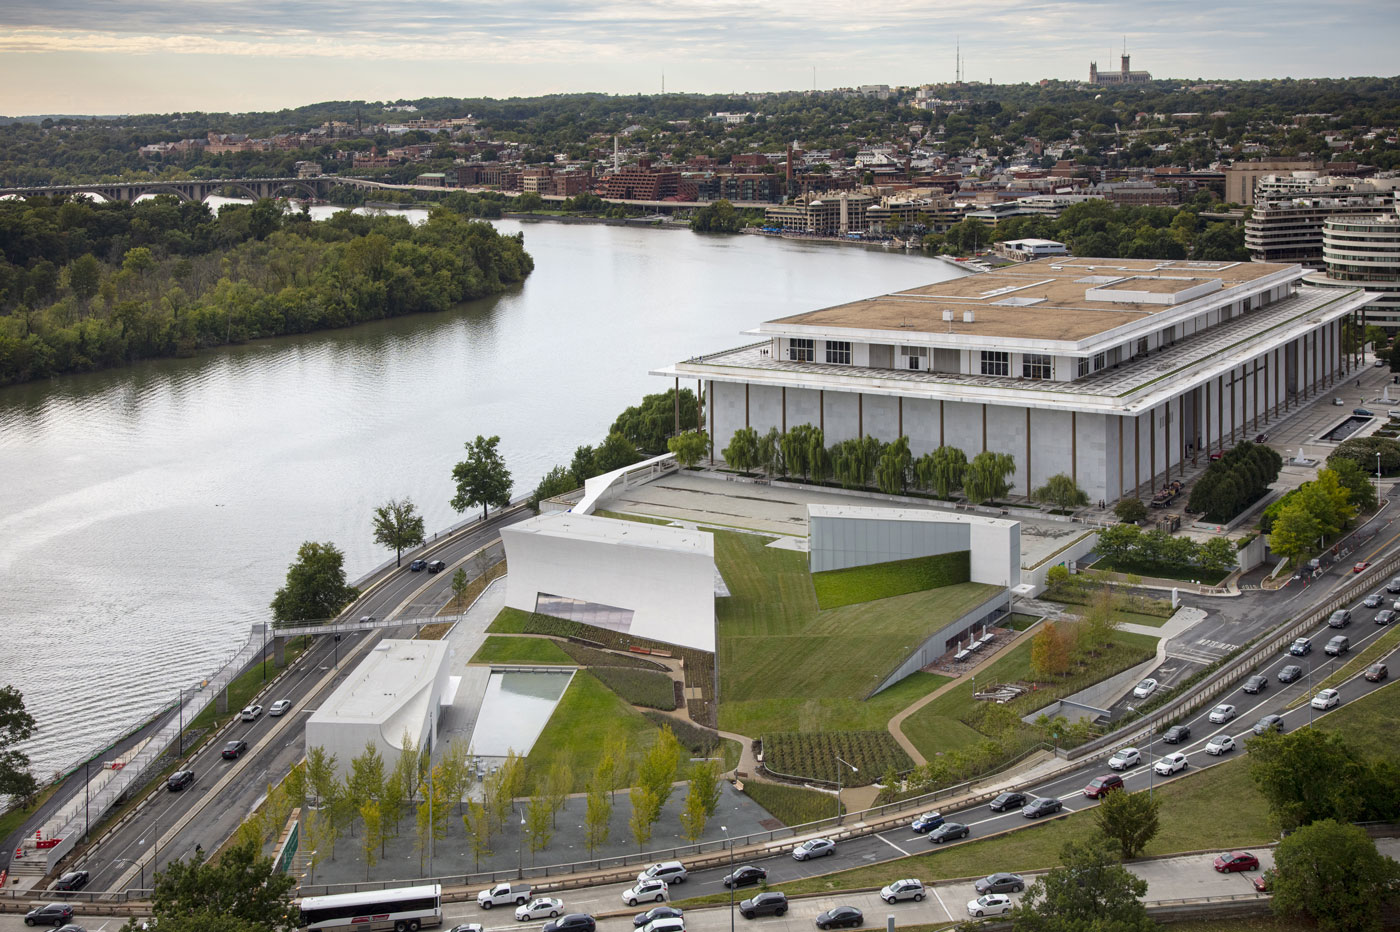 The REACH, the John F Kennedy Center for the Performing Arts Featured Image